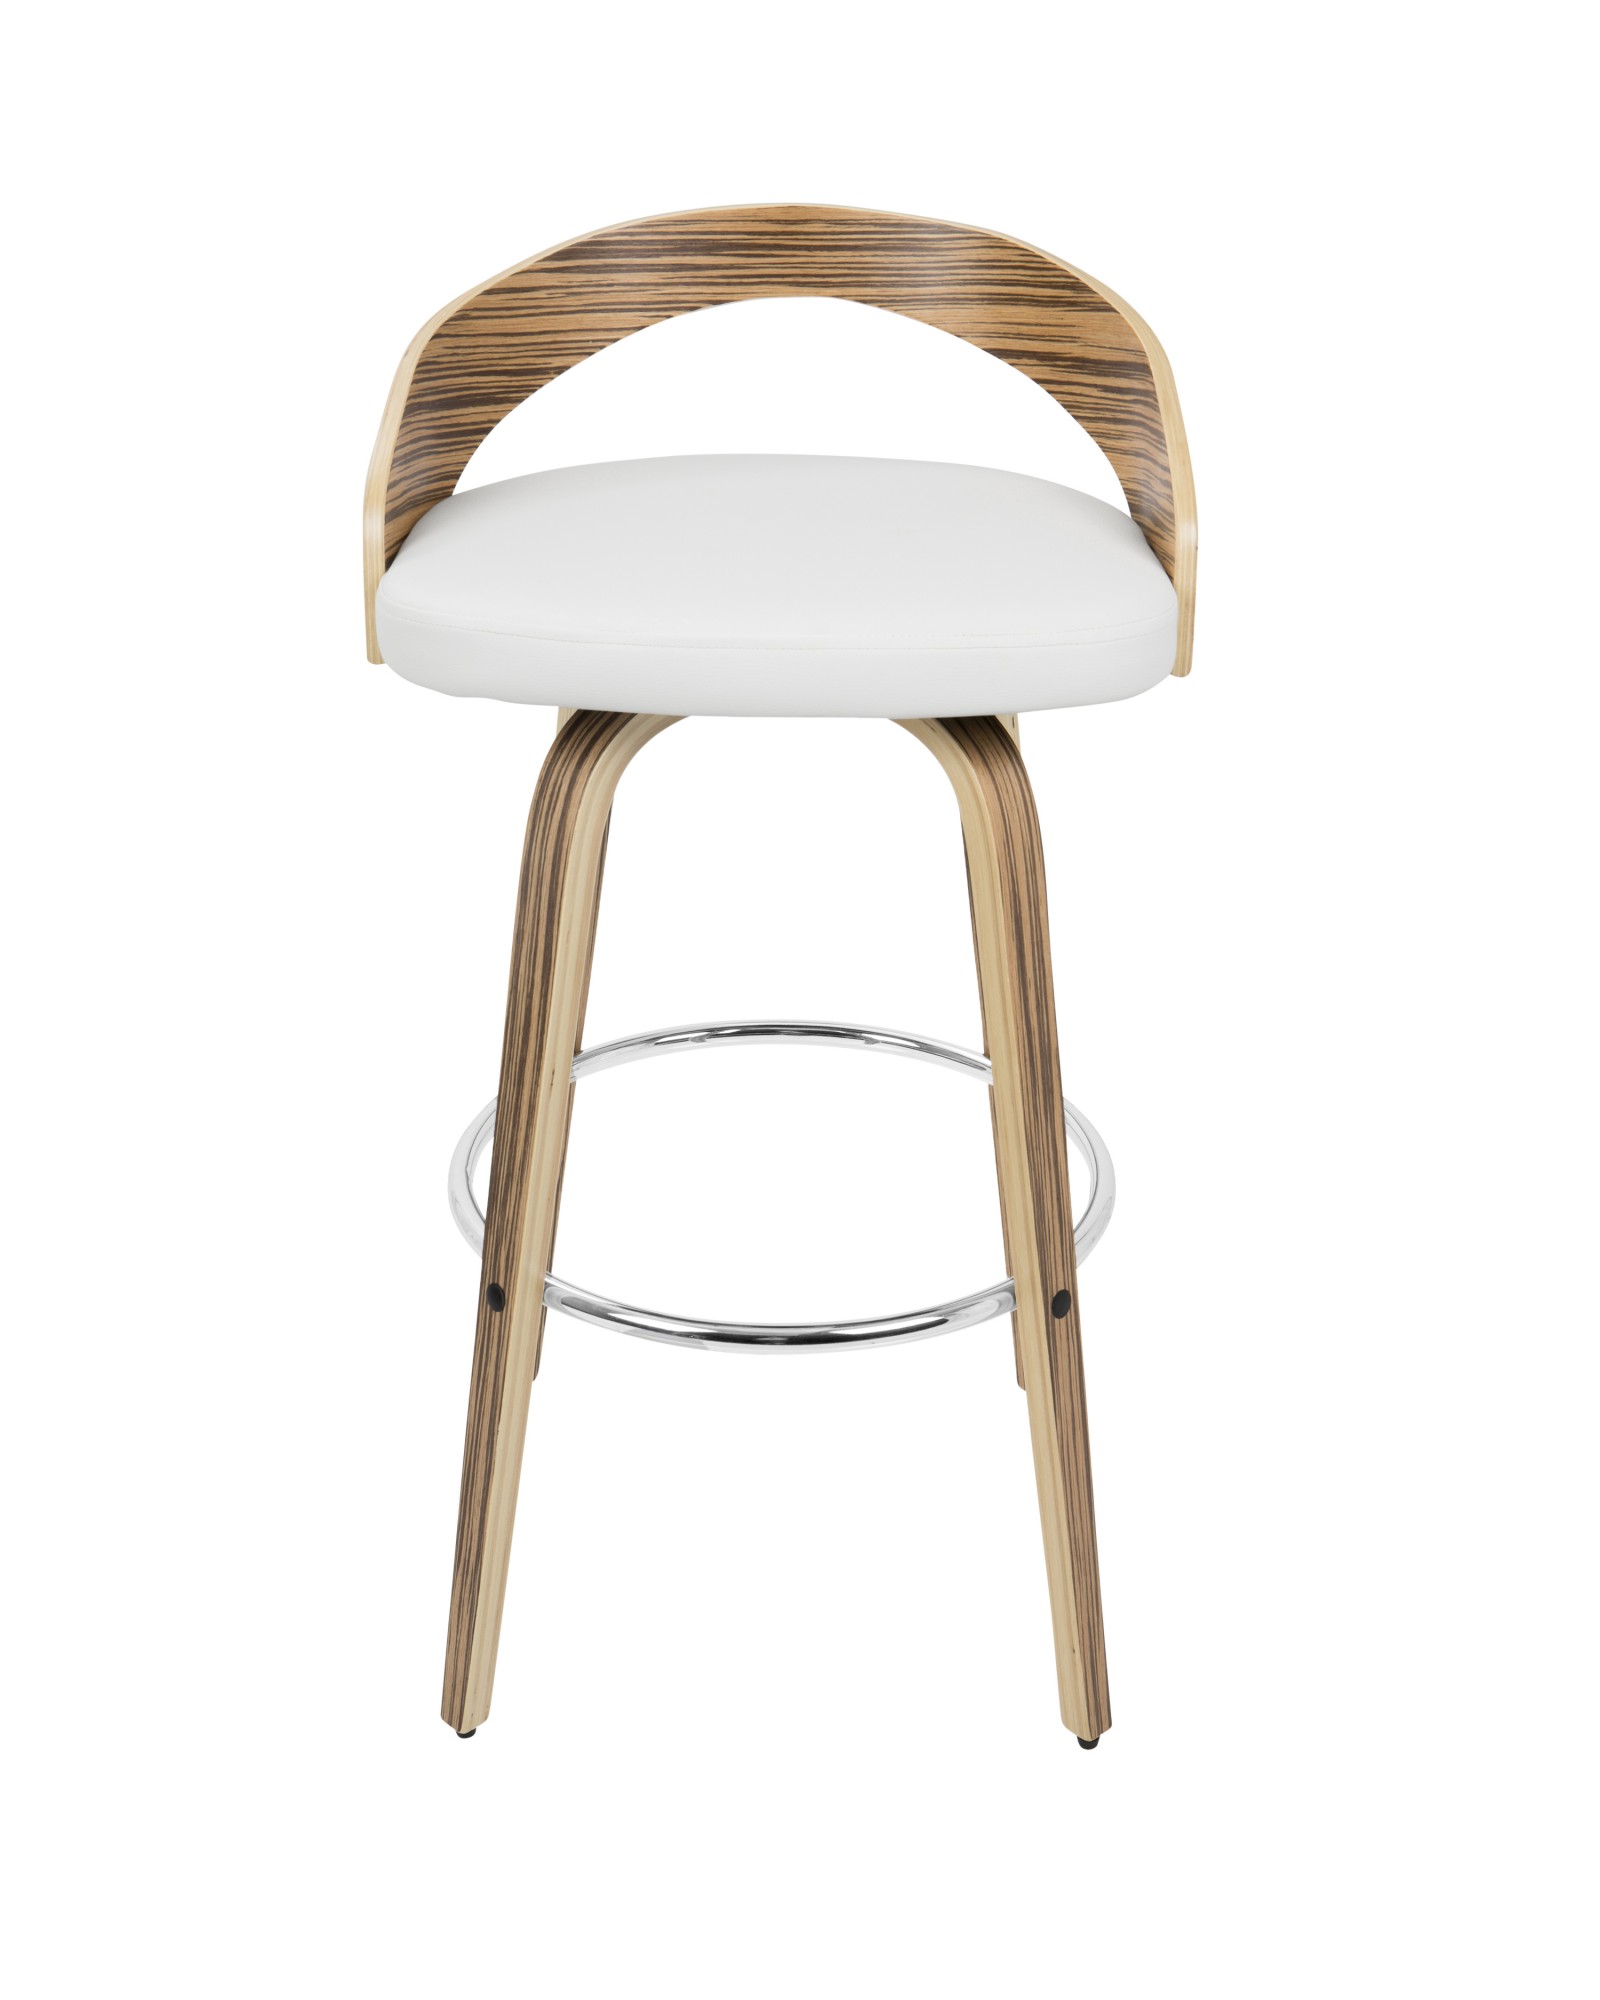 Grotto Mid-Century Modern Barstool with Swivel in Zebra Wood with White Faux Leather